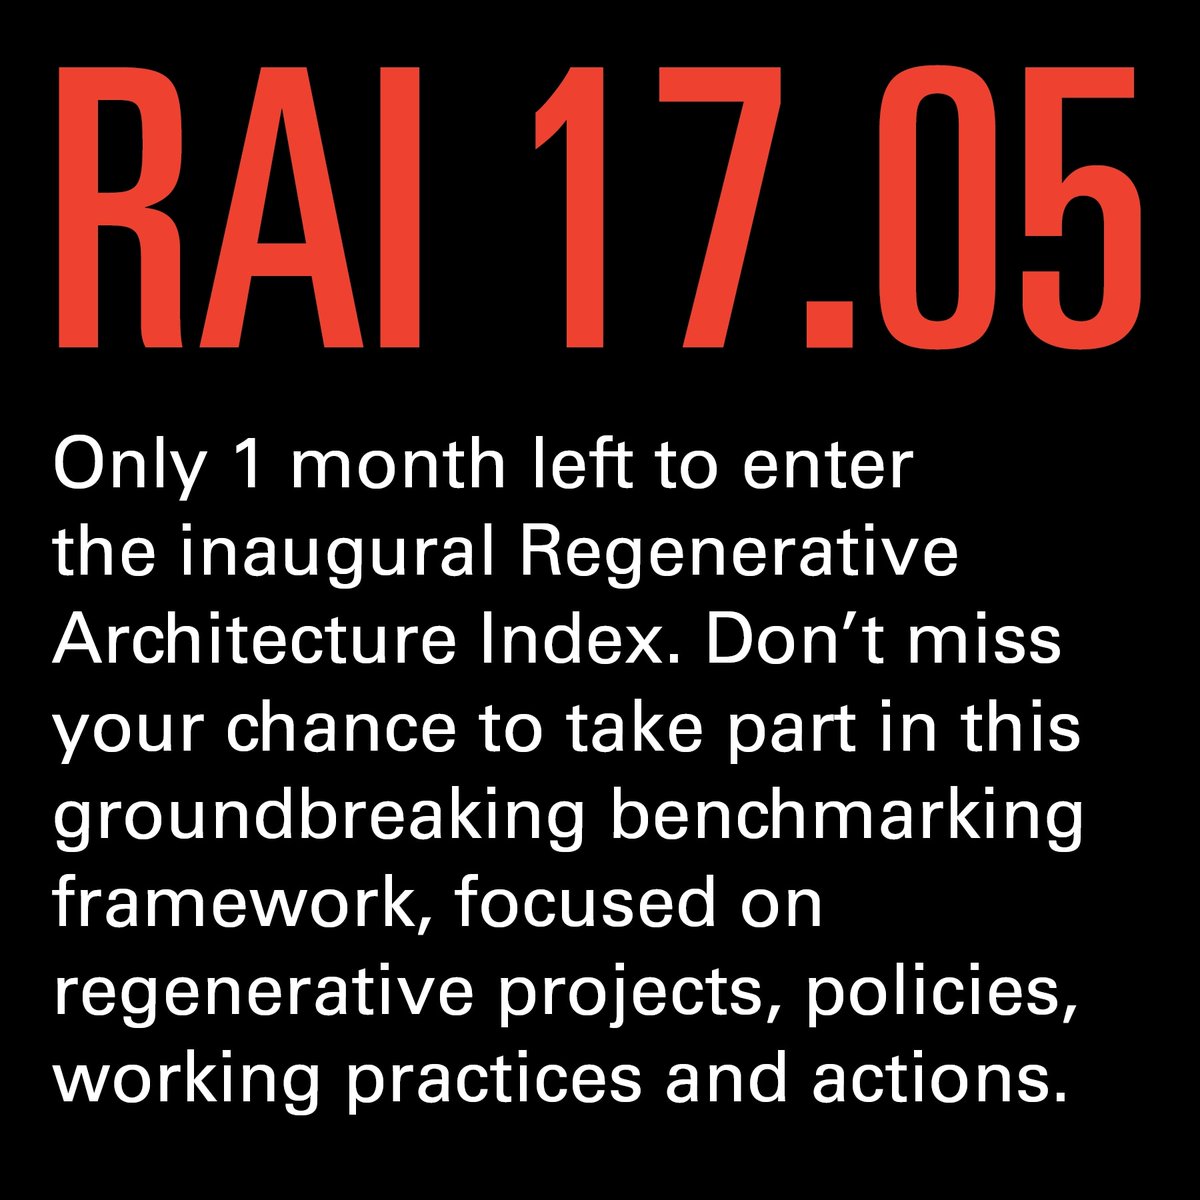 Just under a month to apply for the Regenerative Architecture Index, with applications closing on 17.05. Start your entry & download the free Primer document, via links in bio #regenerativearchitecture #benchmarking #rai @Architect_Today